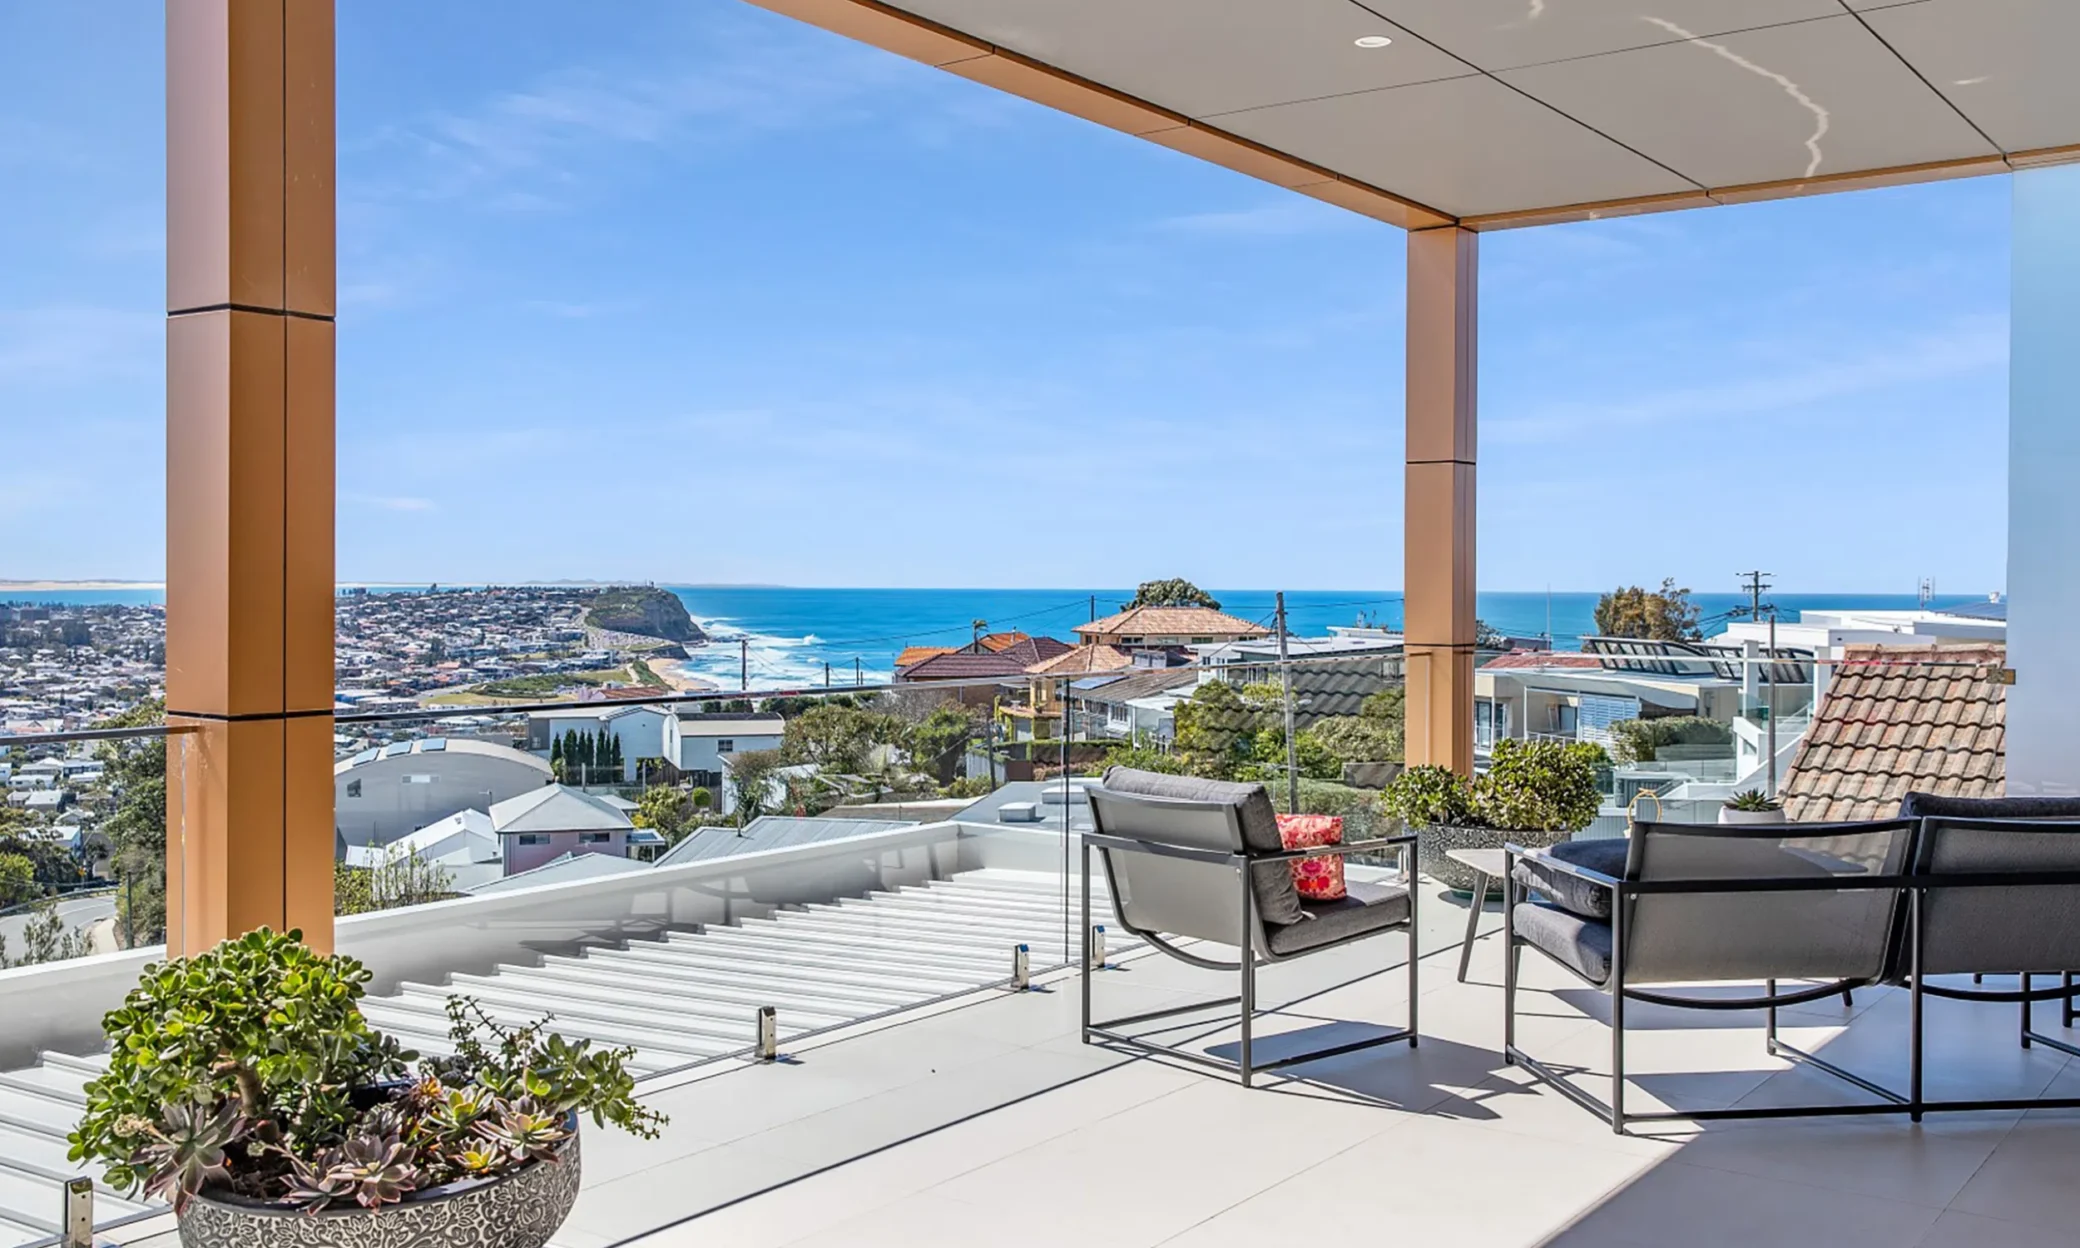 A modern terrace with a glass balustrade offers a stunning panoramic view of Newcastle and the ocean. The space is furnished with a dark table, chairs, and decorative plants, under a clear blue sky